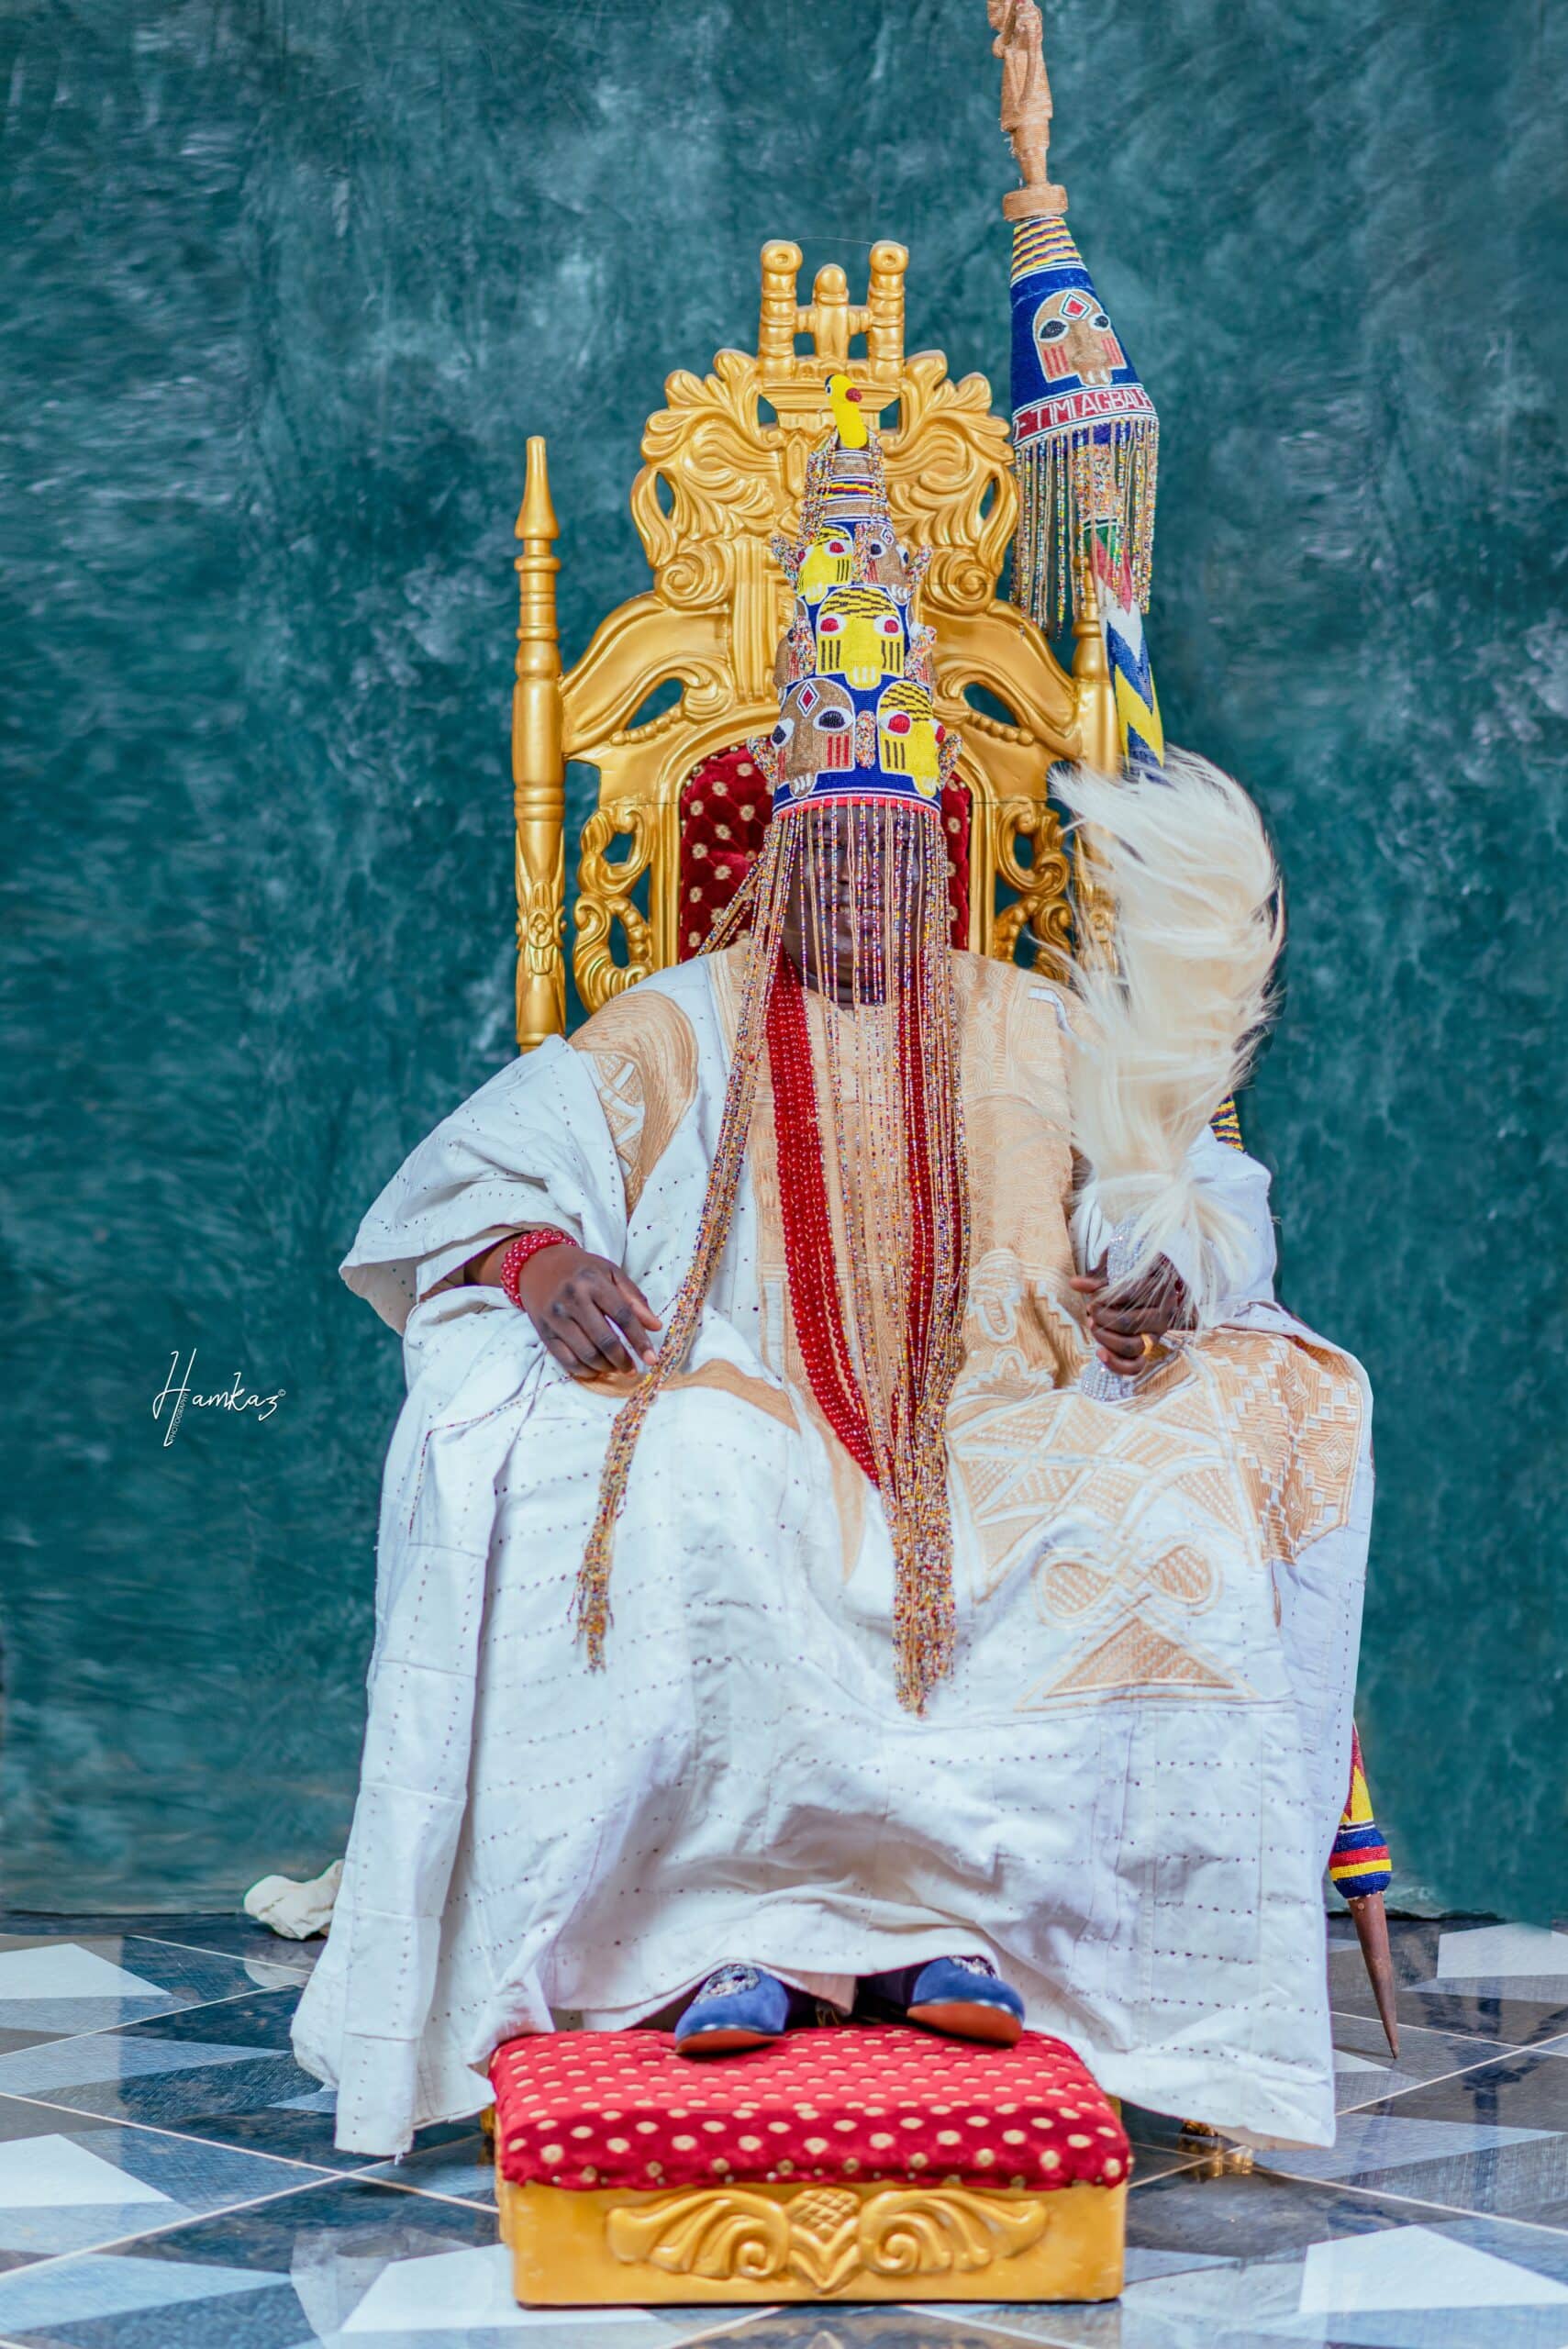 Timi Ede 15th Coronation Anniversary: Planning Committee Rolls out activities